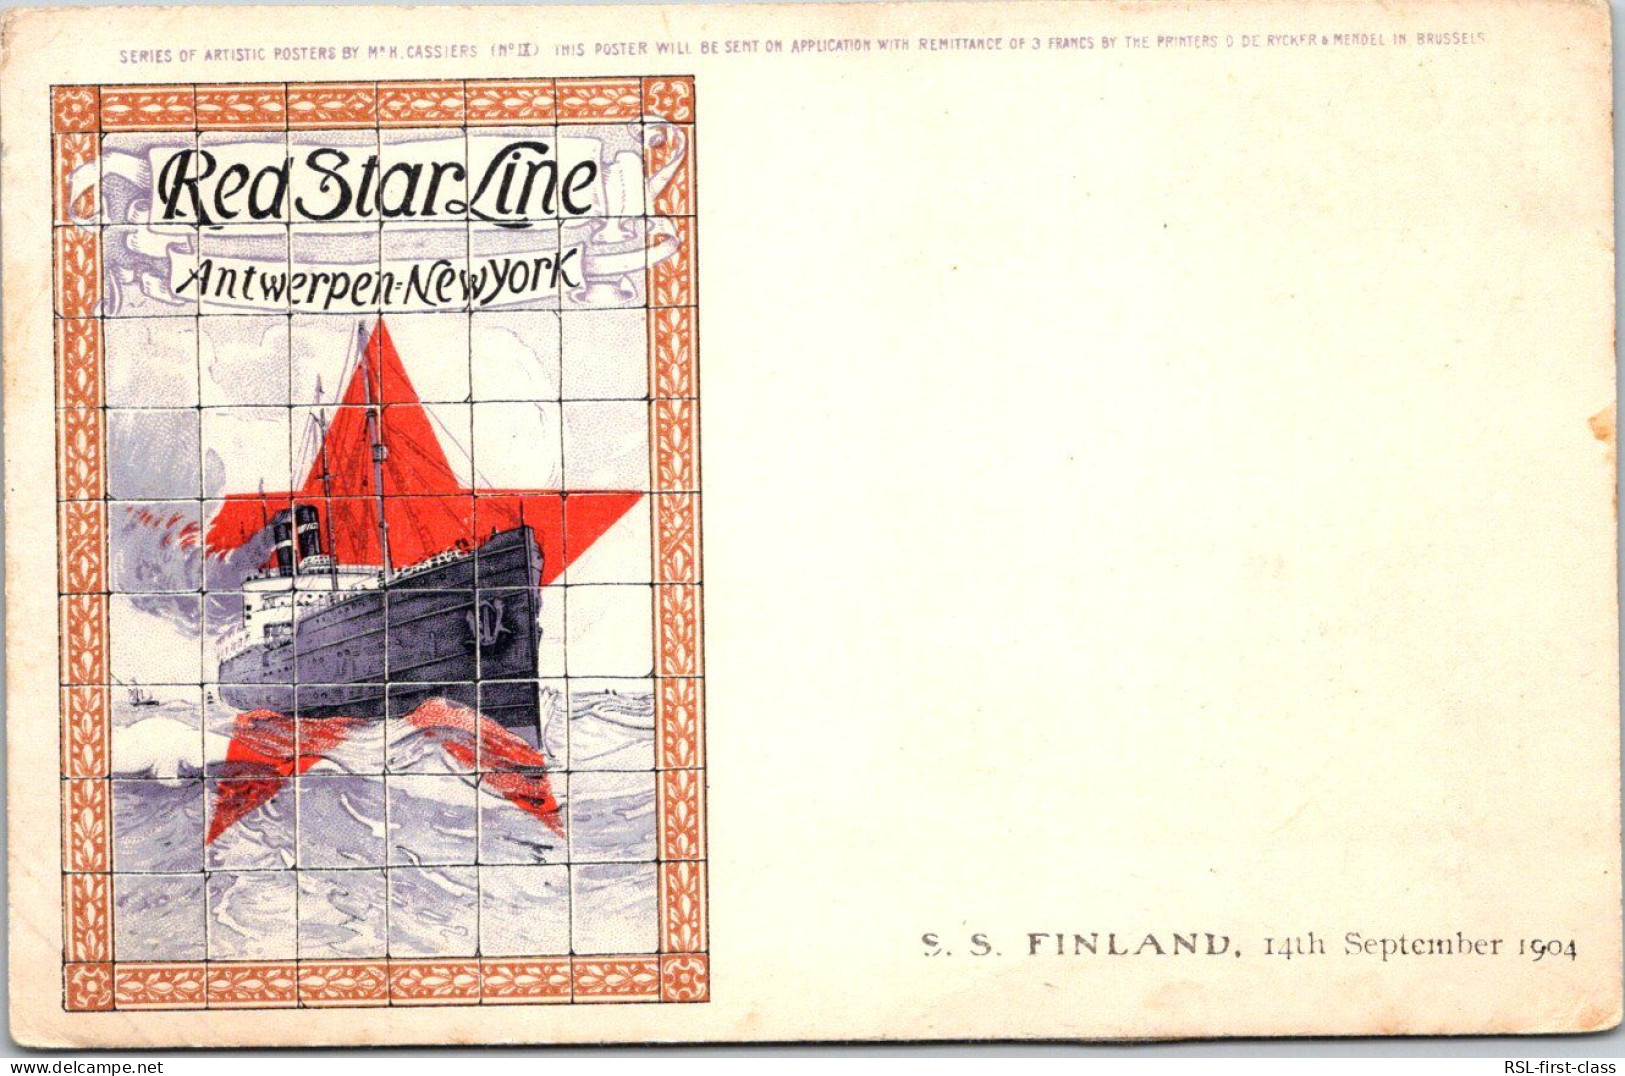 RED STAR LINE : Special Card C-6s From Serie C : Poster Designs, By H. Cassiers - Rrrarissimes - Steamers